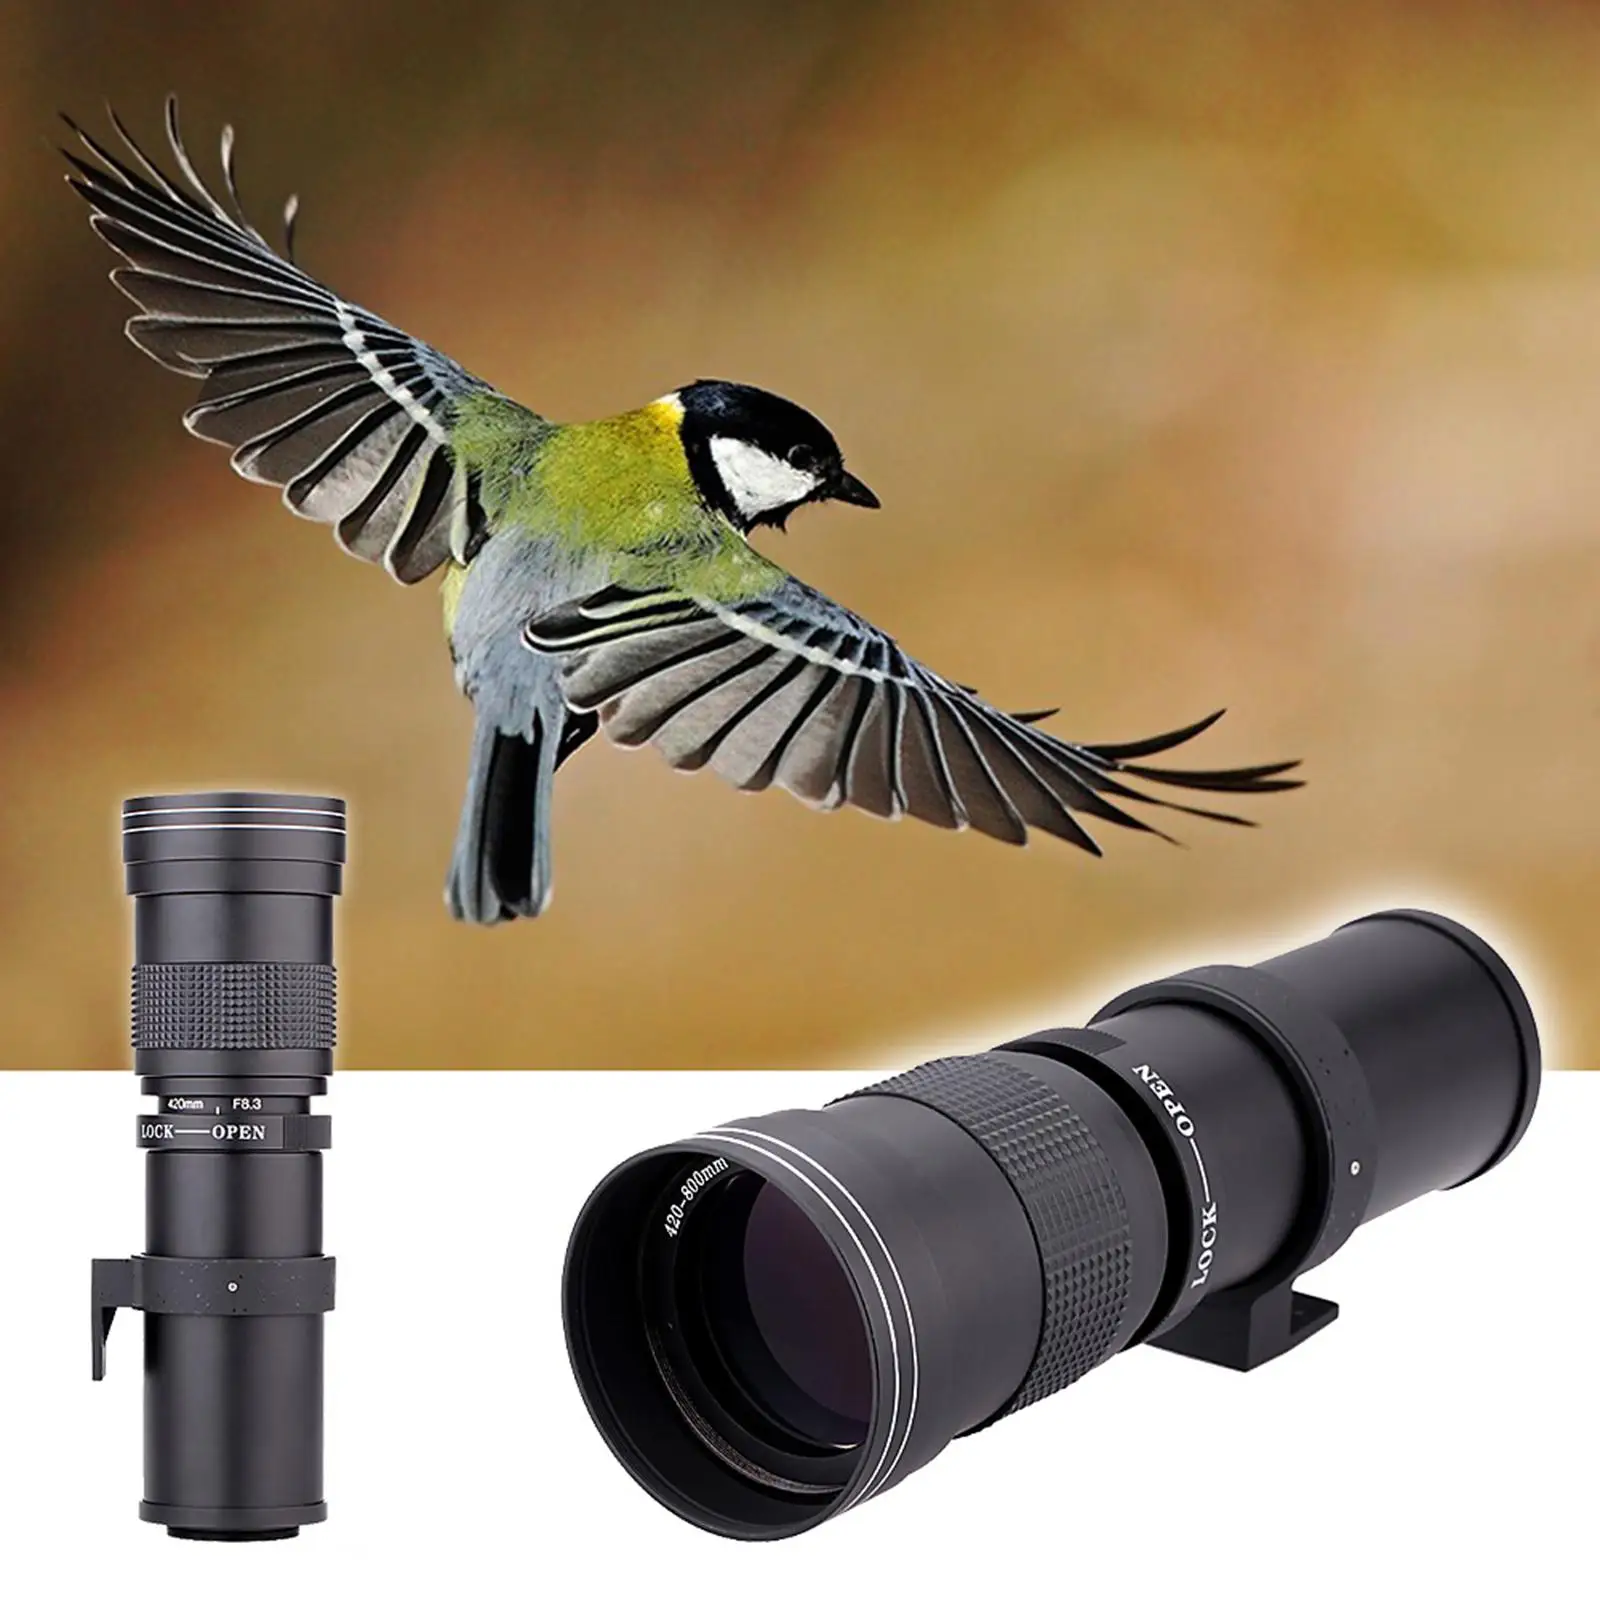 420-800mm Super Telephoto  Lens Metal with Lens Pouch Optical Glass Lens